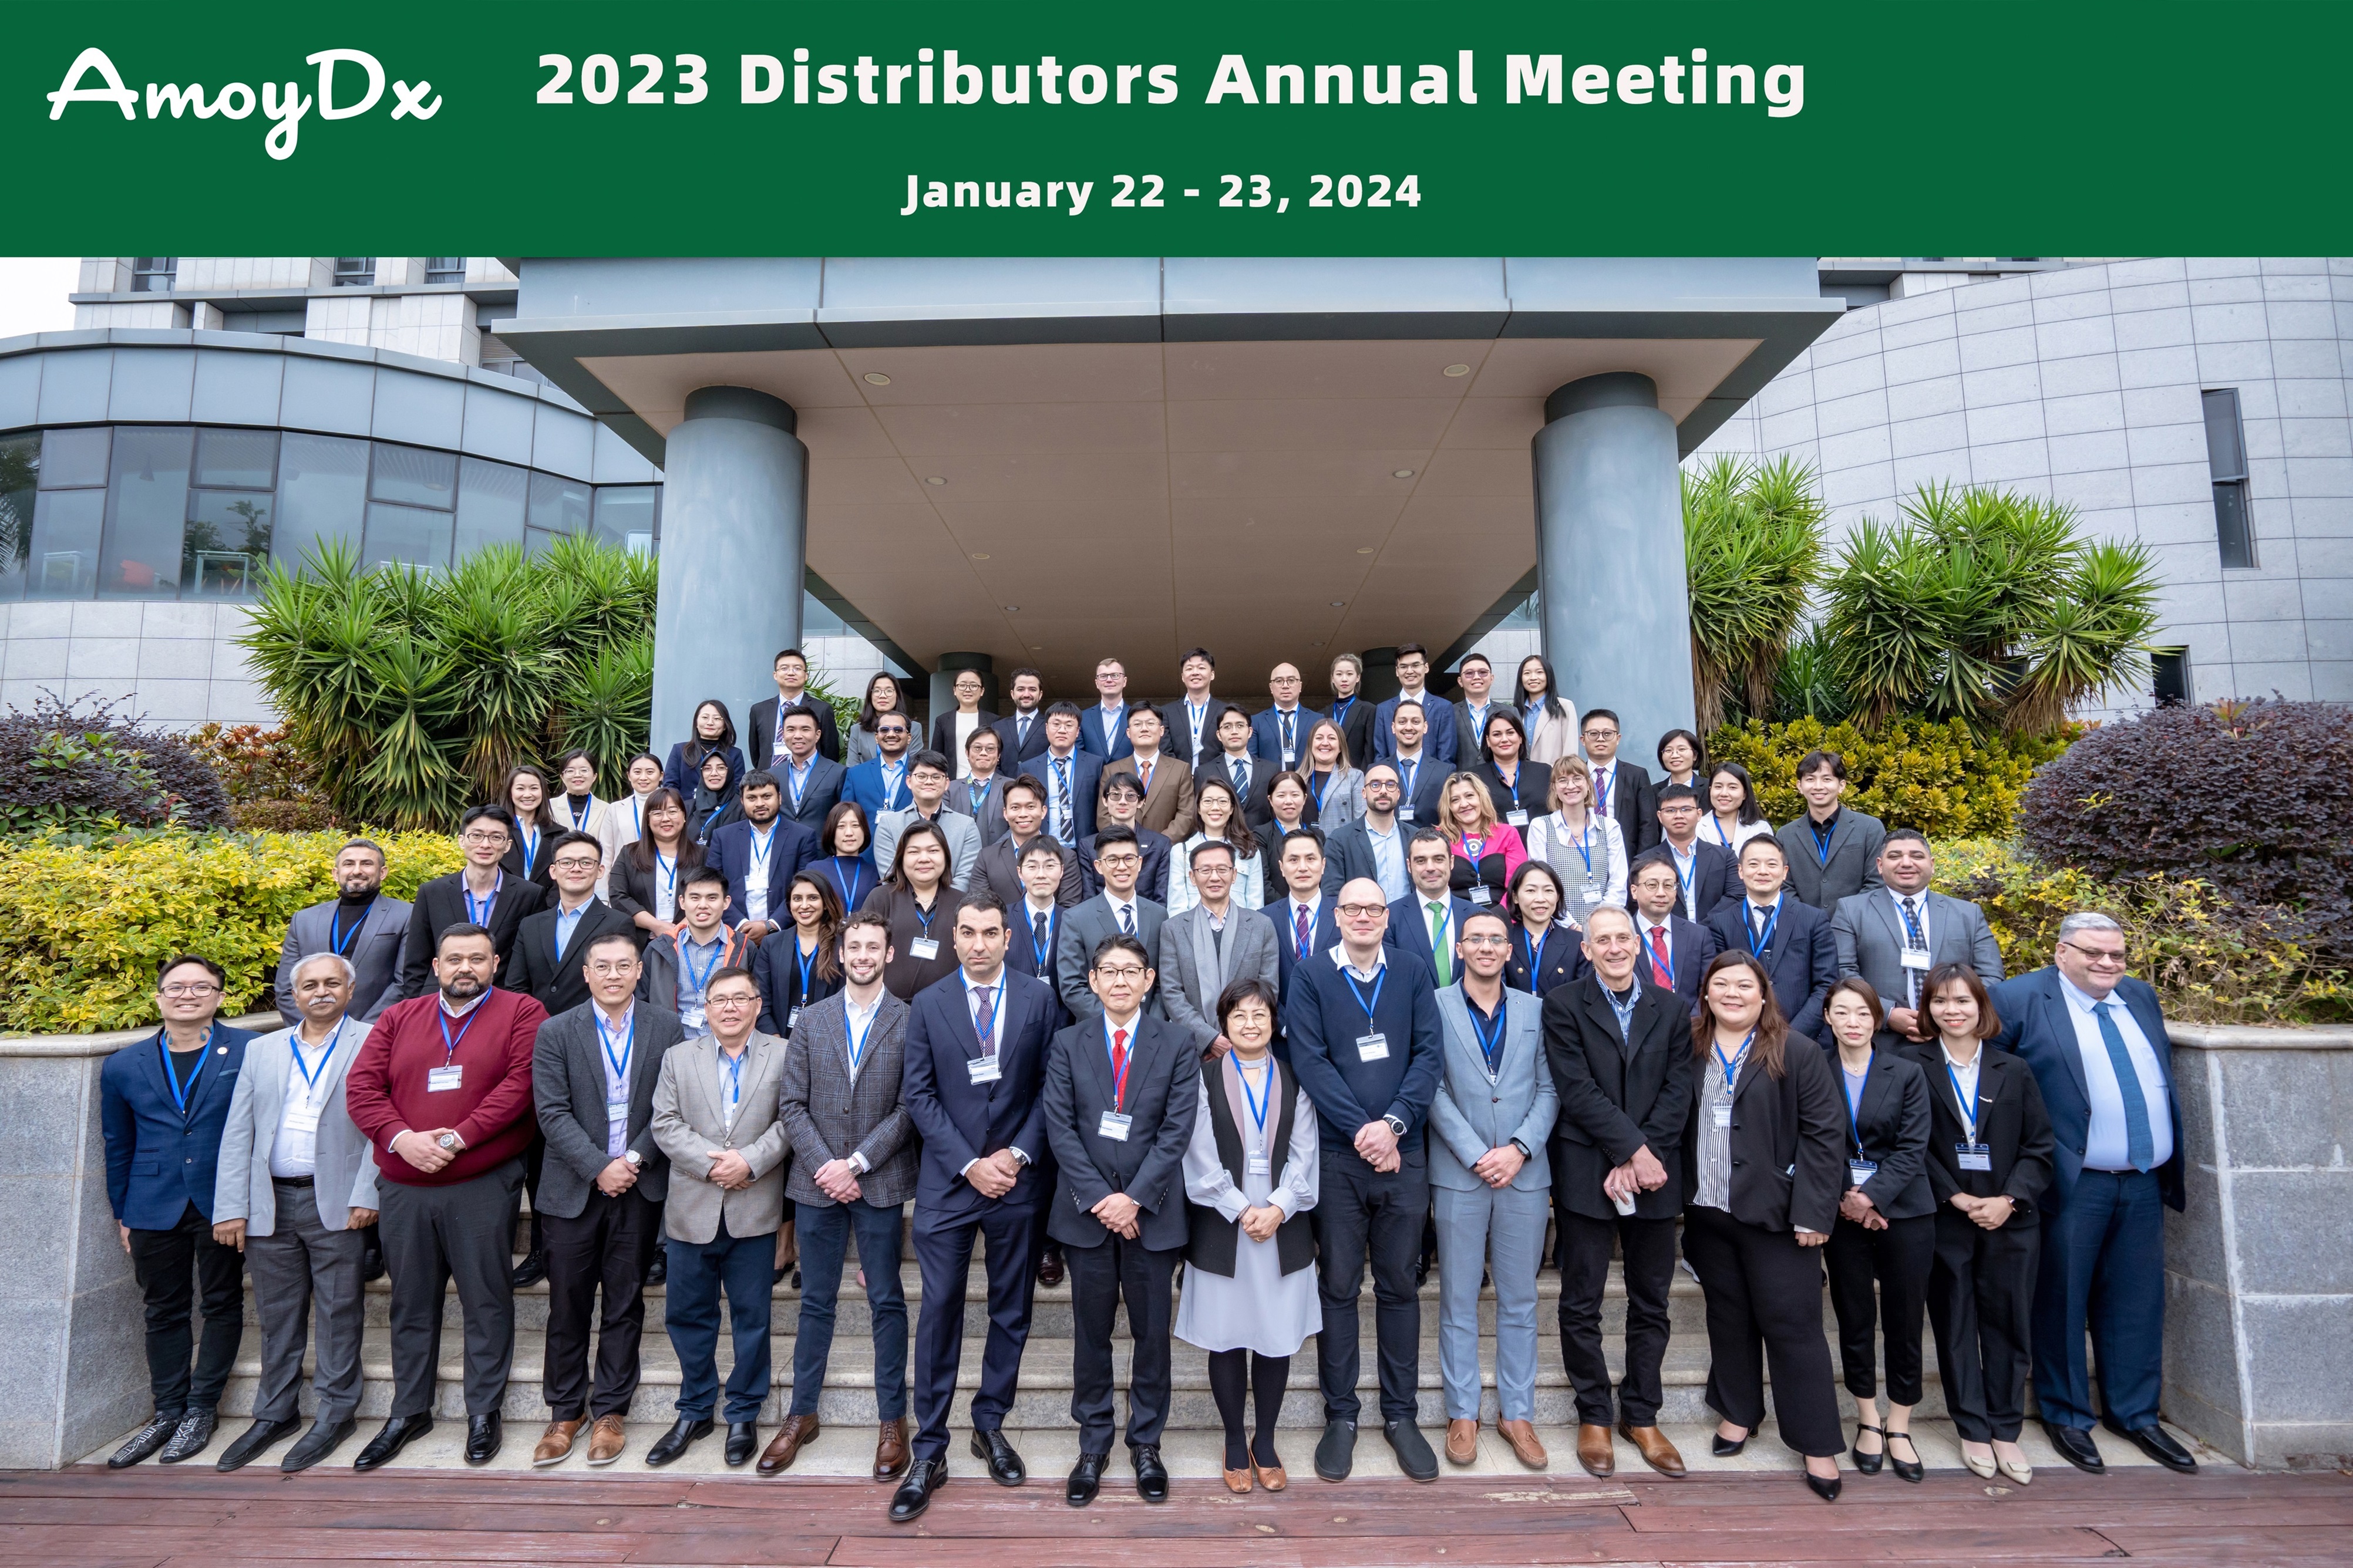 AmoyDx has successfully held the 2023 Distributors Annual Meeting at the headquarter in Xiamen, China, on January 22-23, 2024